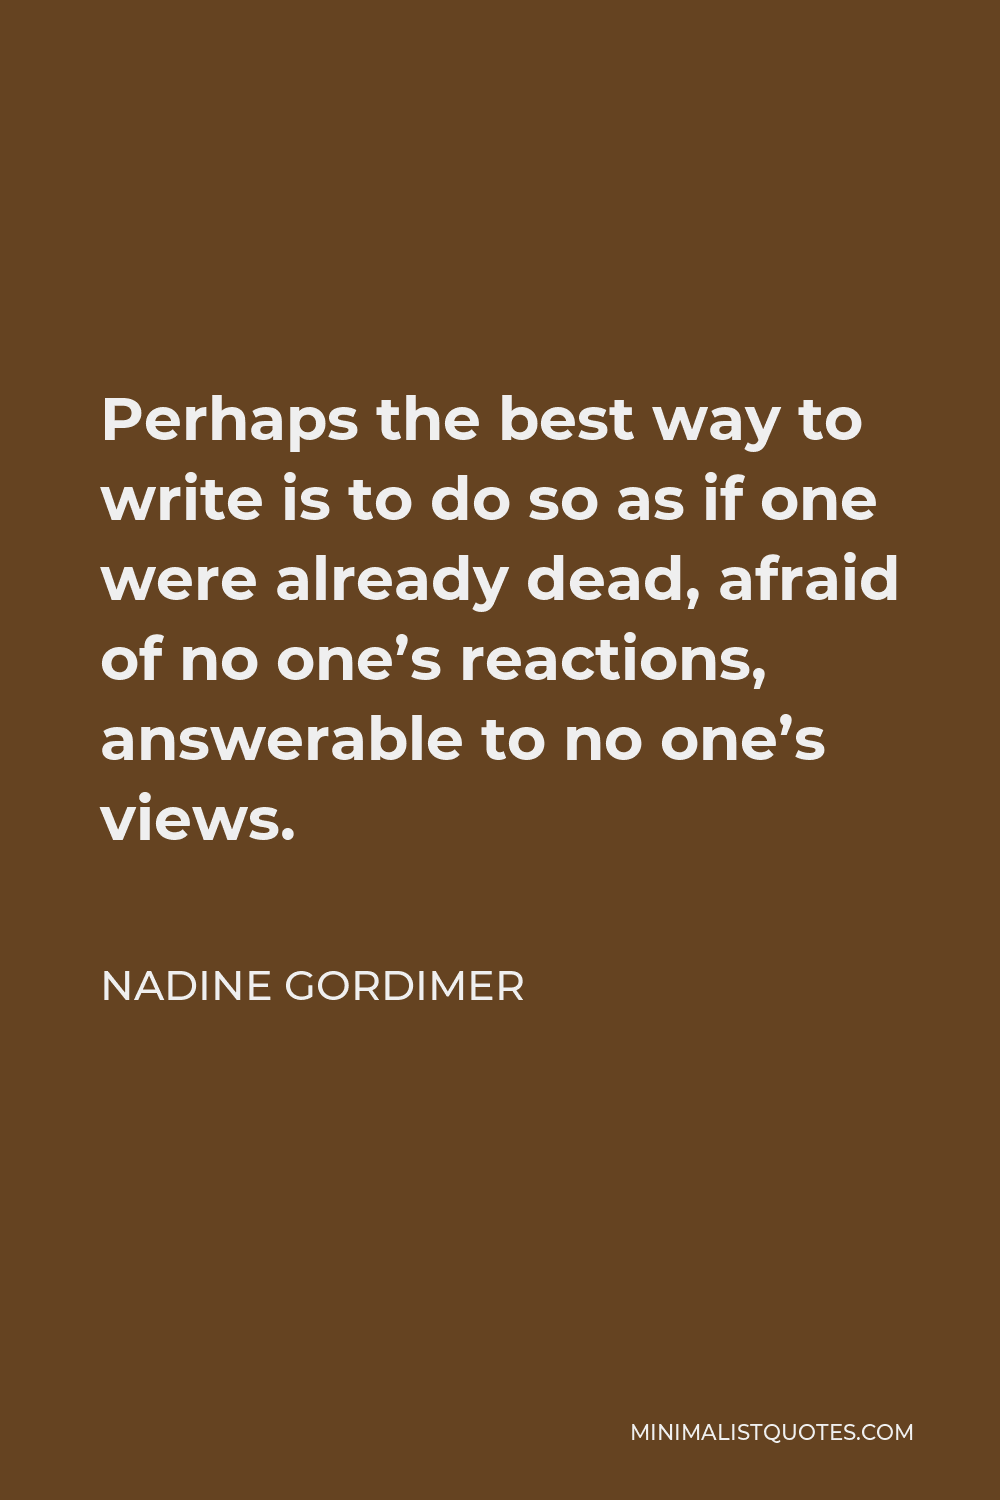 Nadine Gordimer Quote - Perhaps the best way to write is to do so as if one were already dead, afraid of no one’s reactions, answerable to no one’s views.